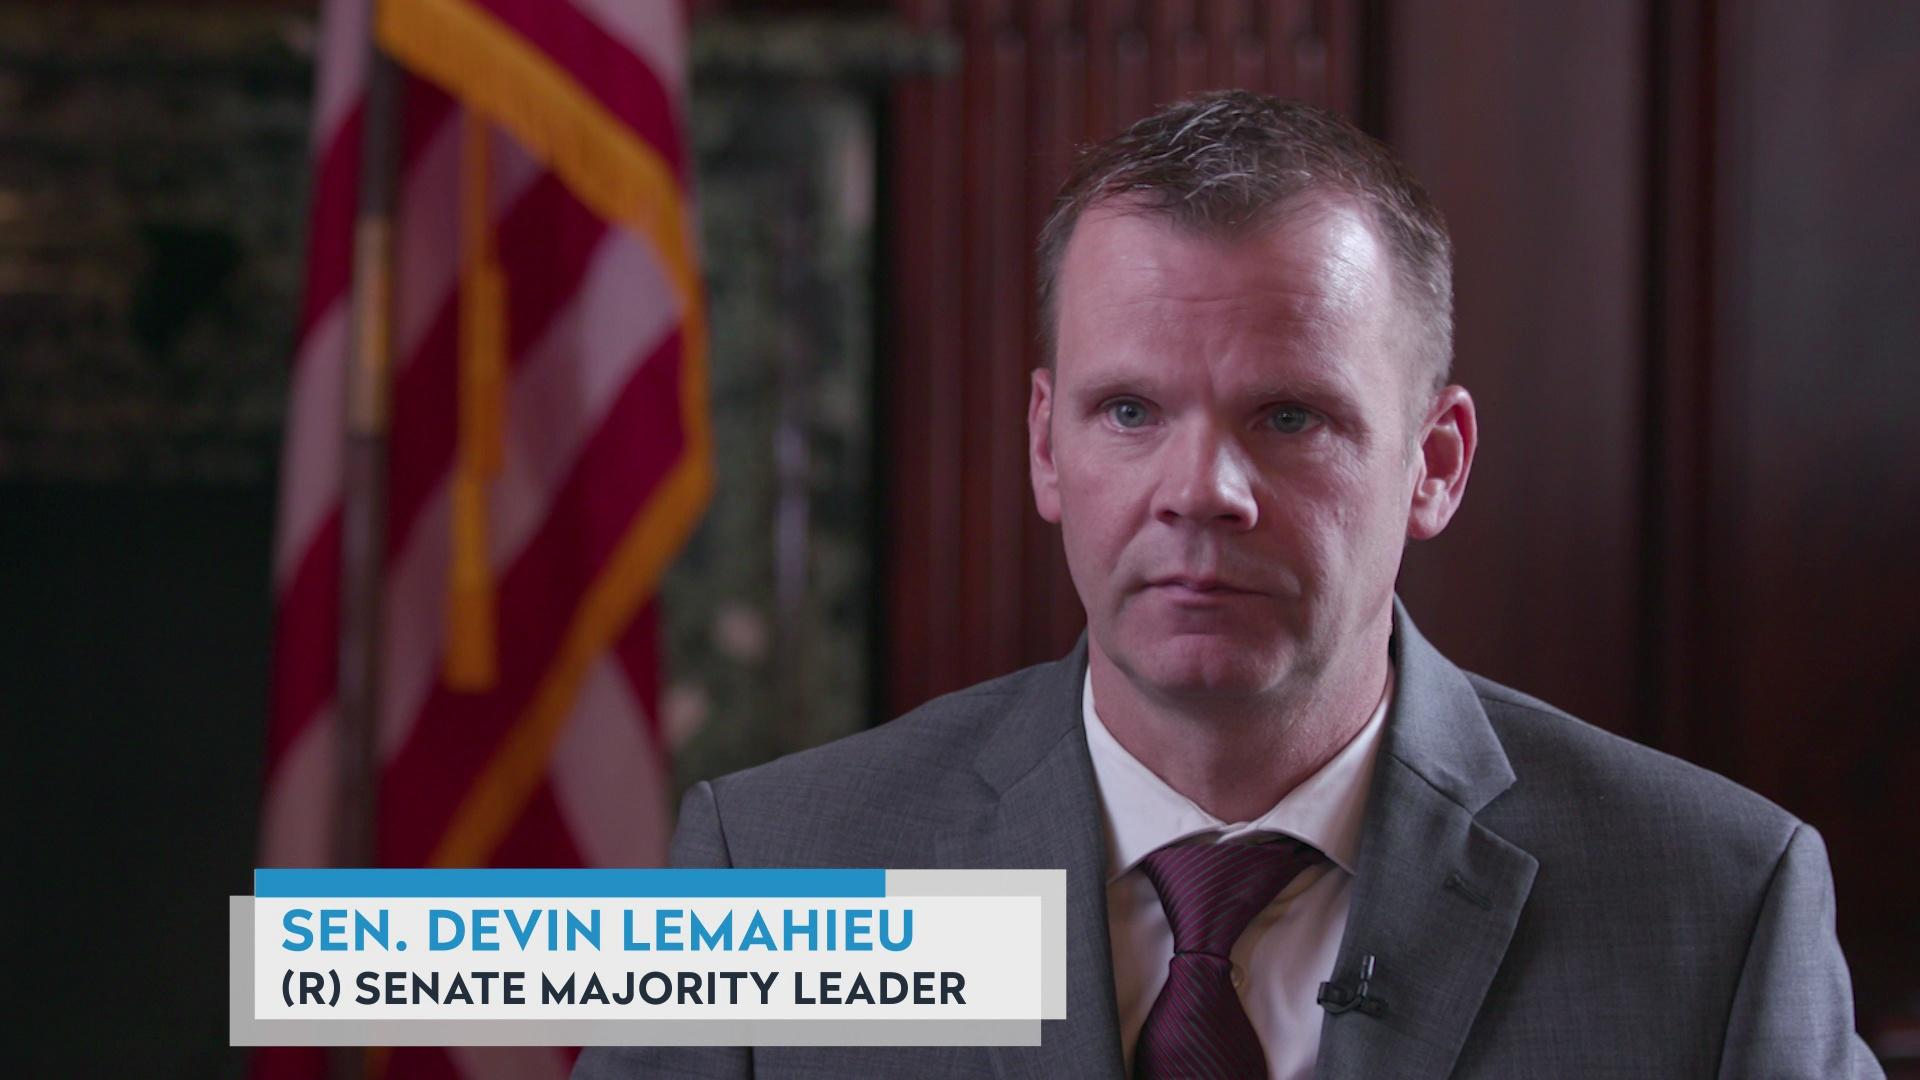 Sen. Devin LeMahieu on impeachment and appointment standards